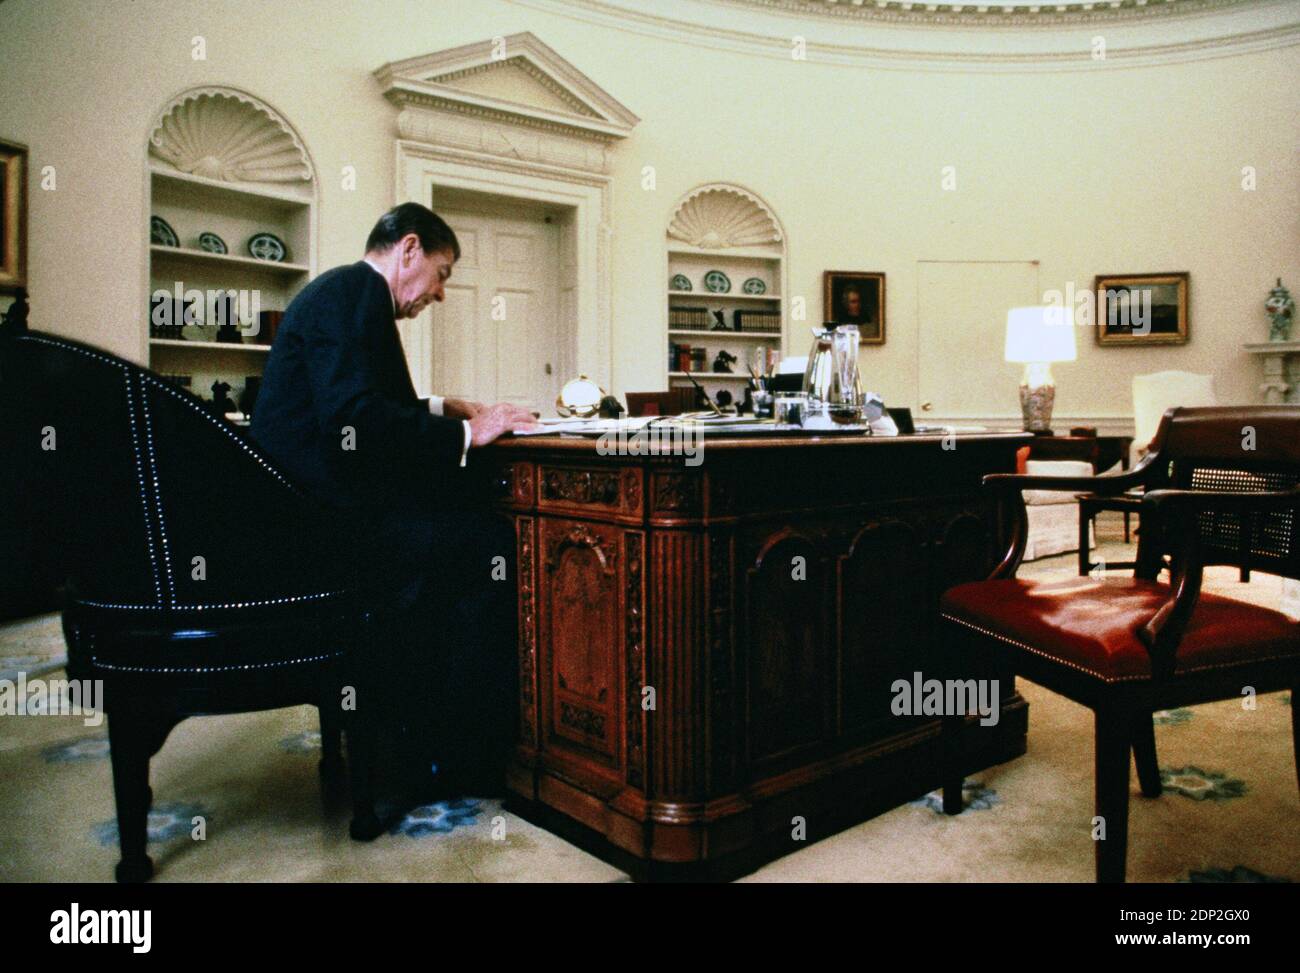 President Ronald Reagan working at the Resolute Desk ion the Oval Office in 1985. This was an exclusive session for a story for a magazine,  I can’t remember which publication  Photograph by Dennis Brack  bb 75 Stock Photo